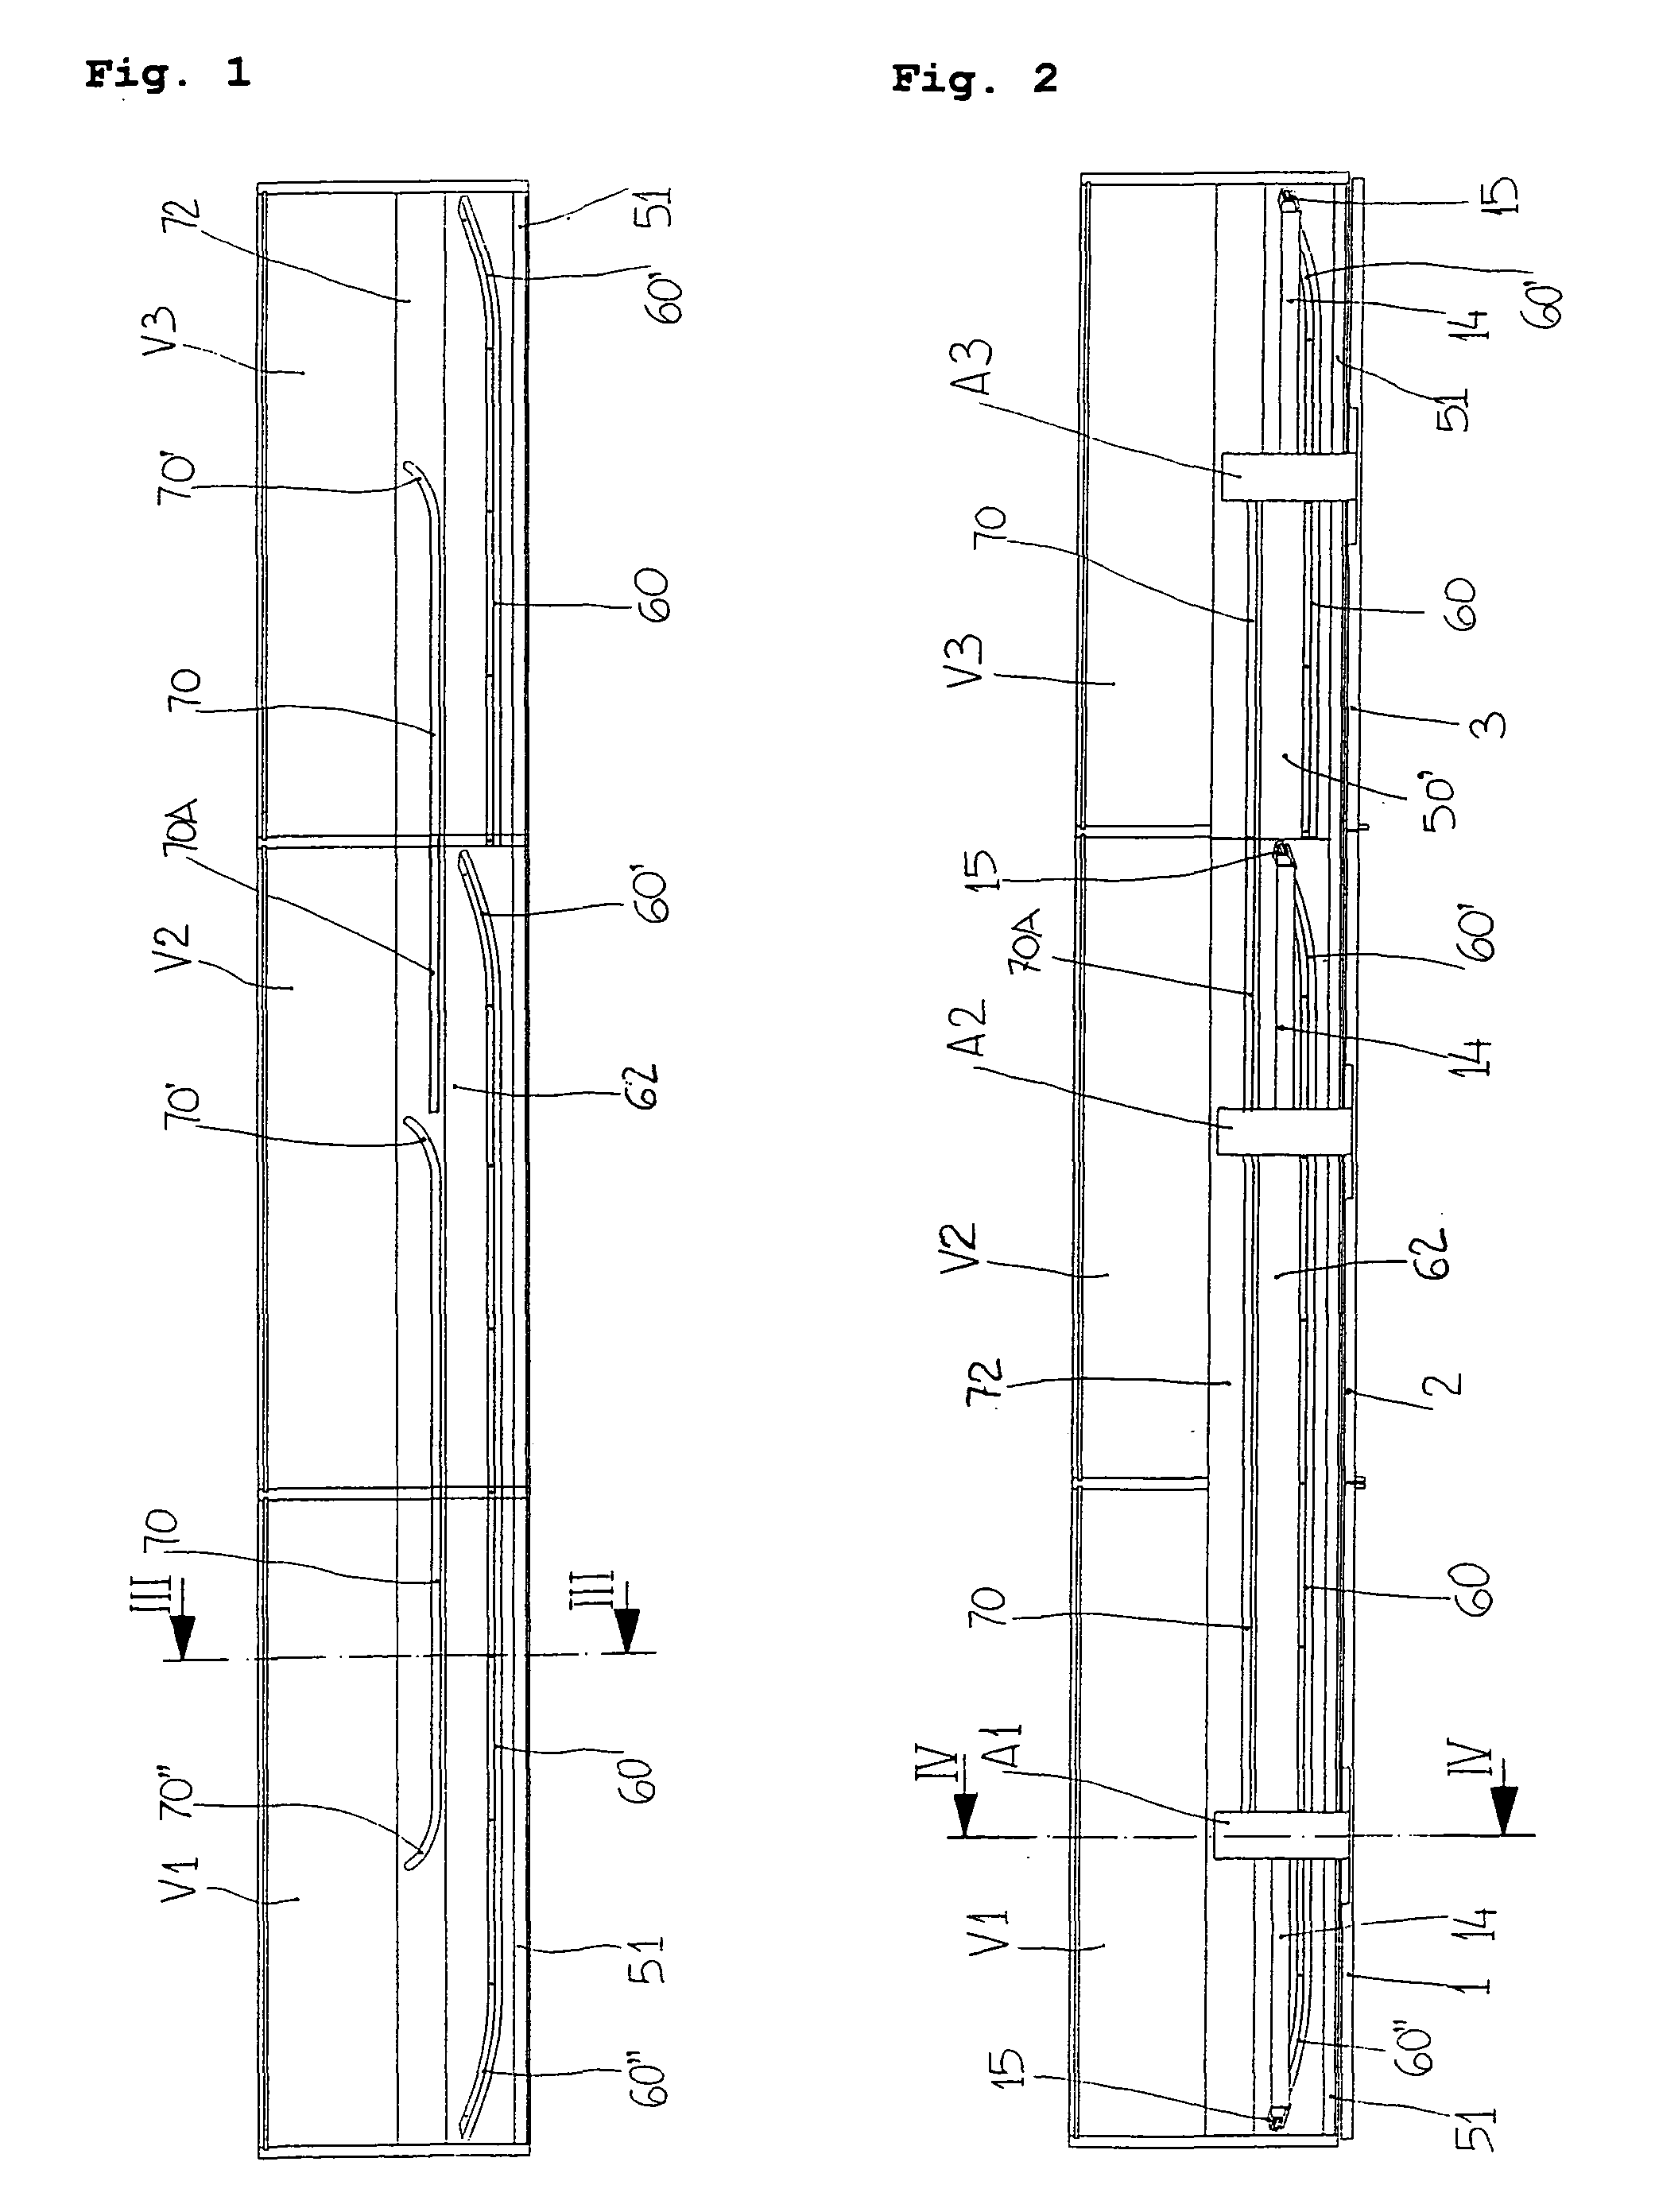 Mechanism for the aligned closure of sliding doors, in particular for units of furniture or compartments with two or more doors